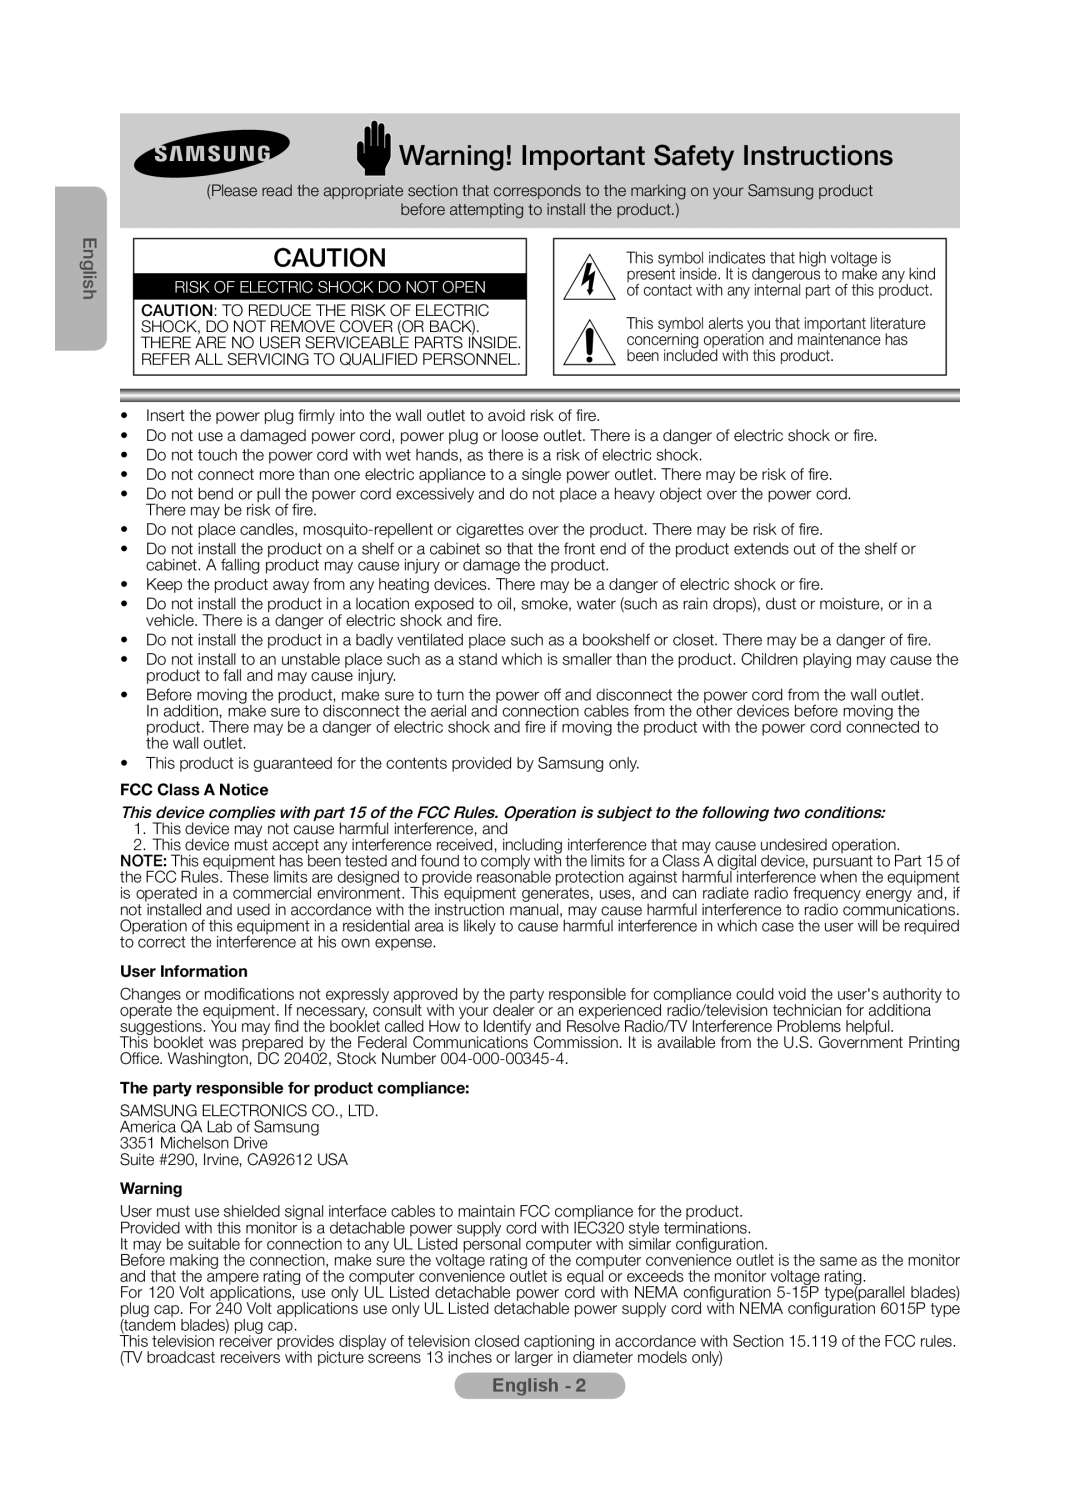 Samsung MR-16SB2 Warning! Important Safety Instructions, English, Risk Of Electric Shock Do Not Open, FCC Class A Notice 